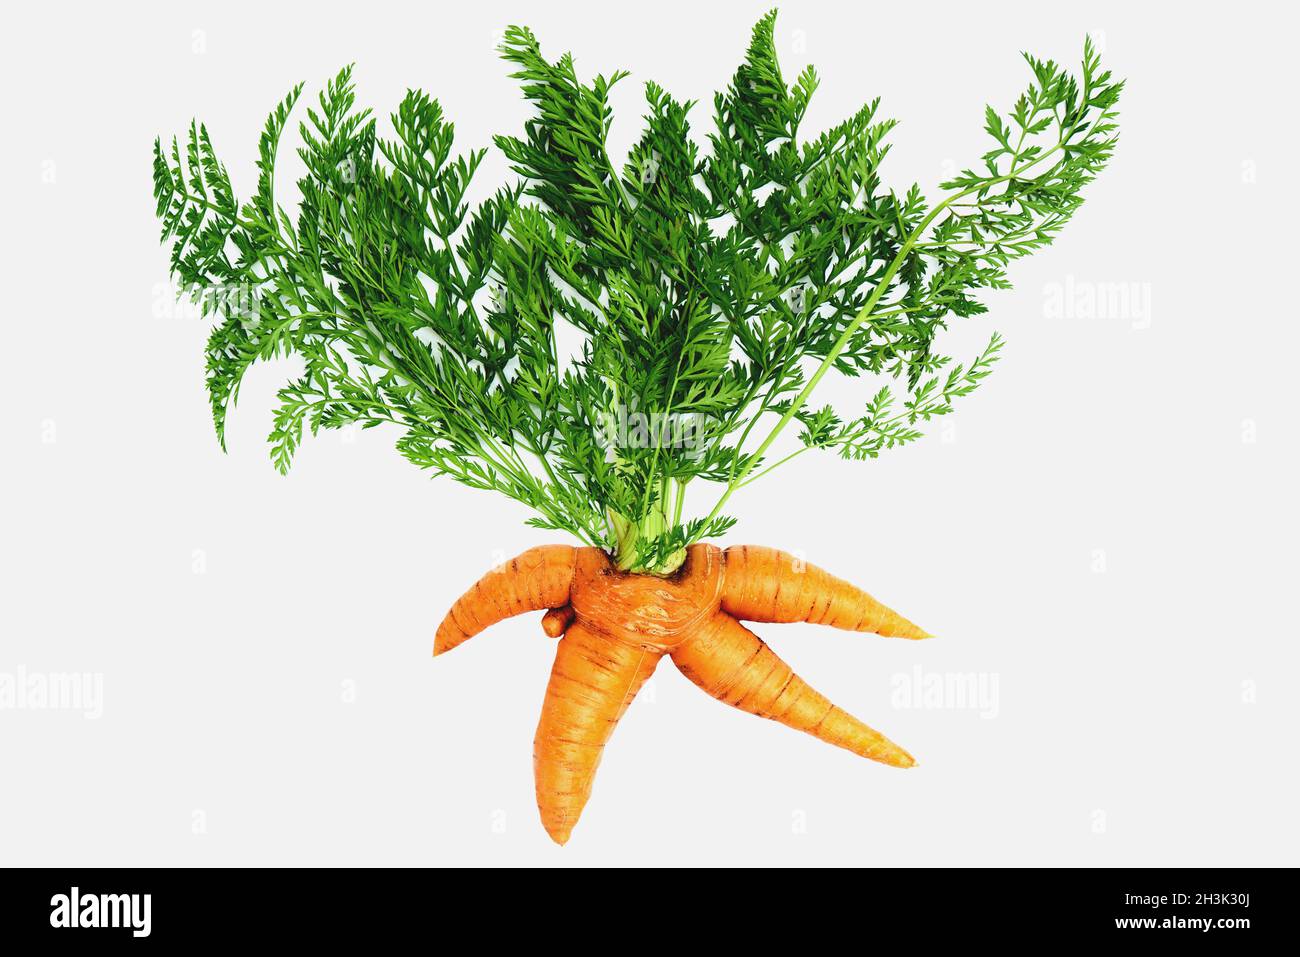 Carrots of an unusual shape on a white background. Stock Photo